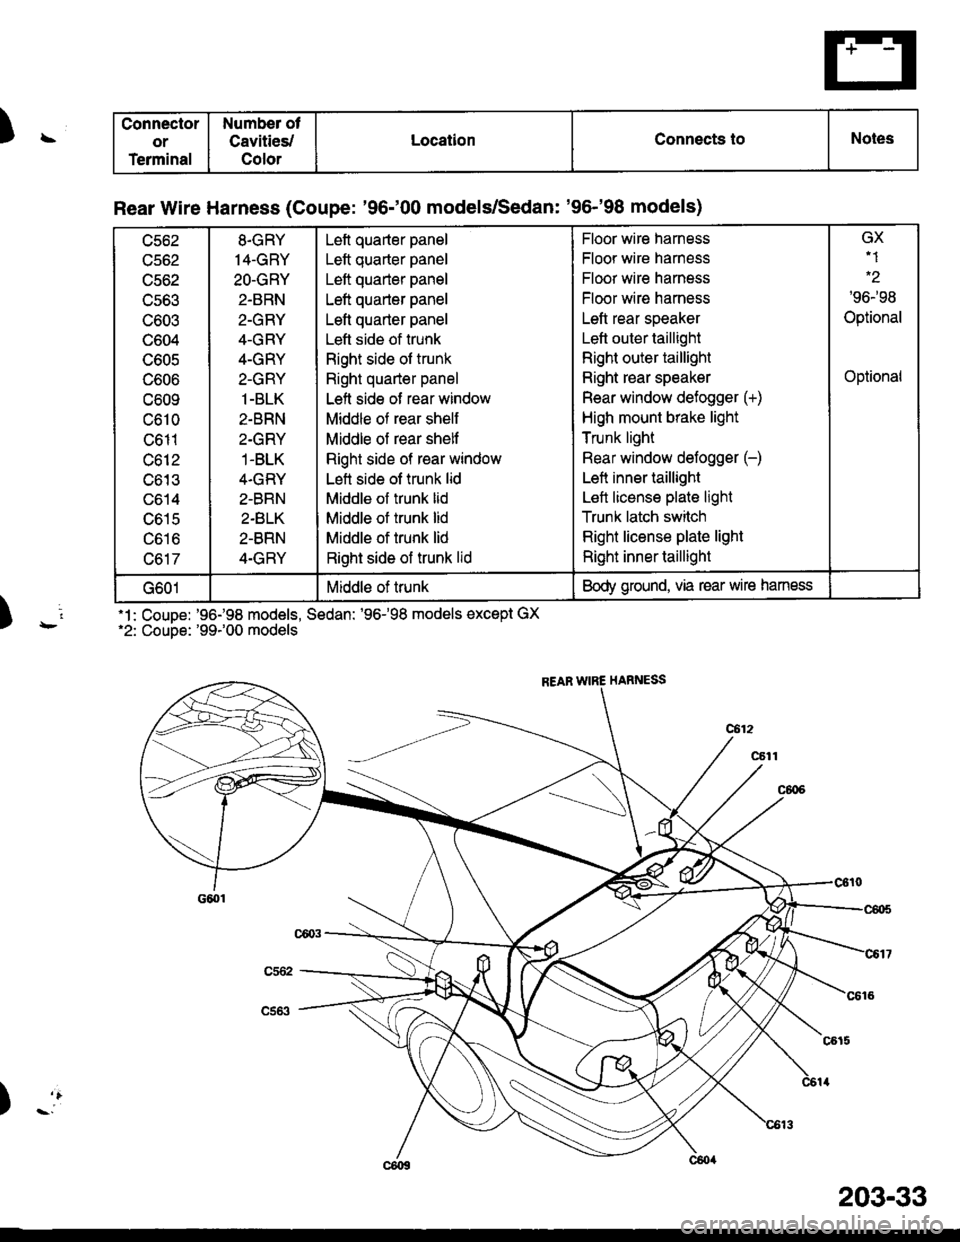 HONDA CIVIC 1996 6.G Workshop Manual )\
)rl
) -:
.1: CouDe: 96198 models, Sedan: 96-98 models except GX2: CouDe: 99r00 models
Connector
or
Terminal
Number ot
Cavities/
Color
LocatlonConnects toNotes
Rear Wire Harness (Coupe: 96-00